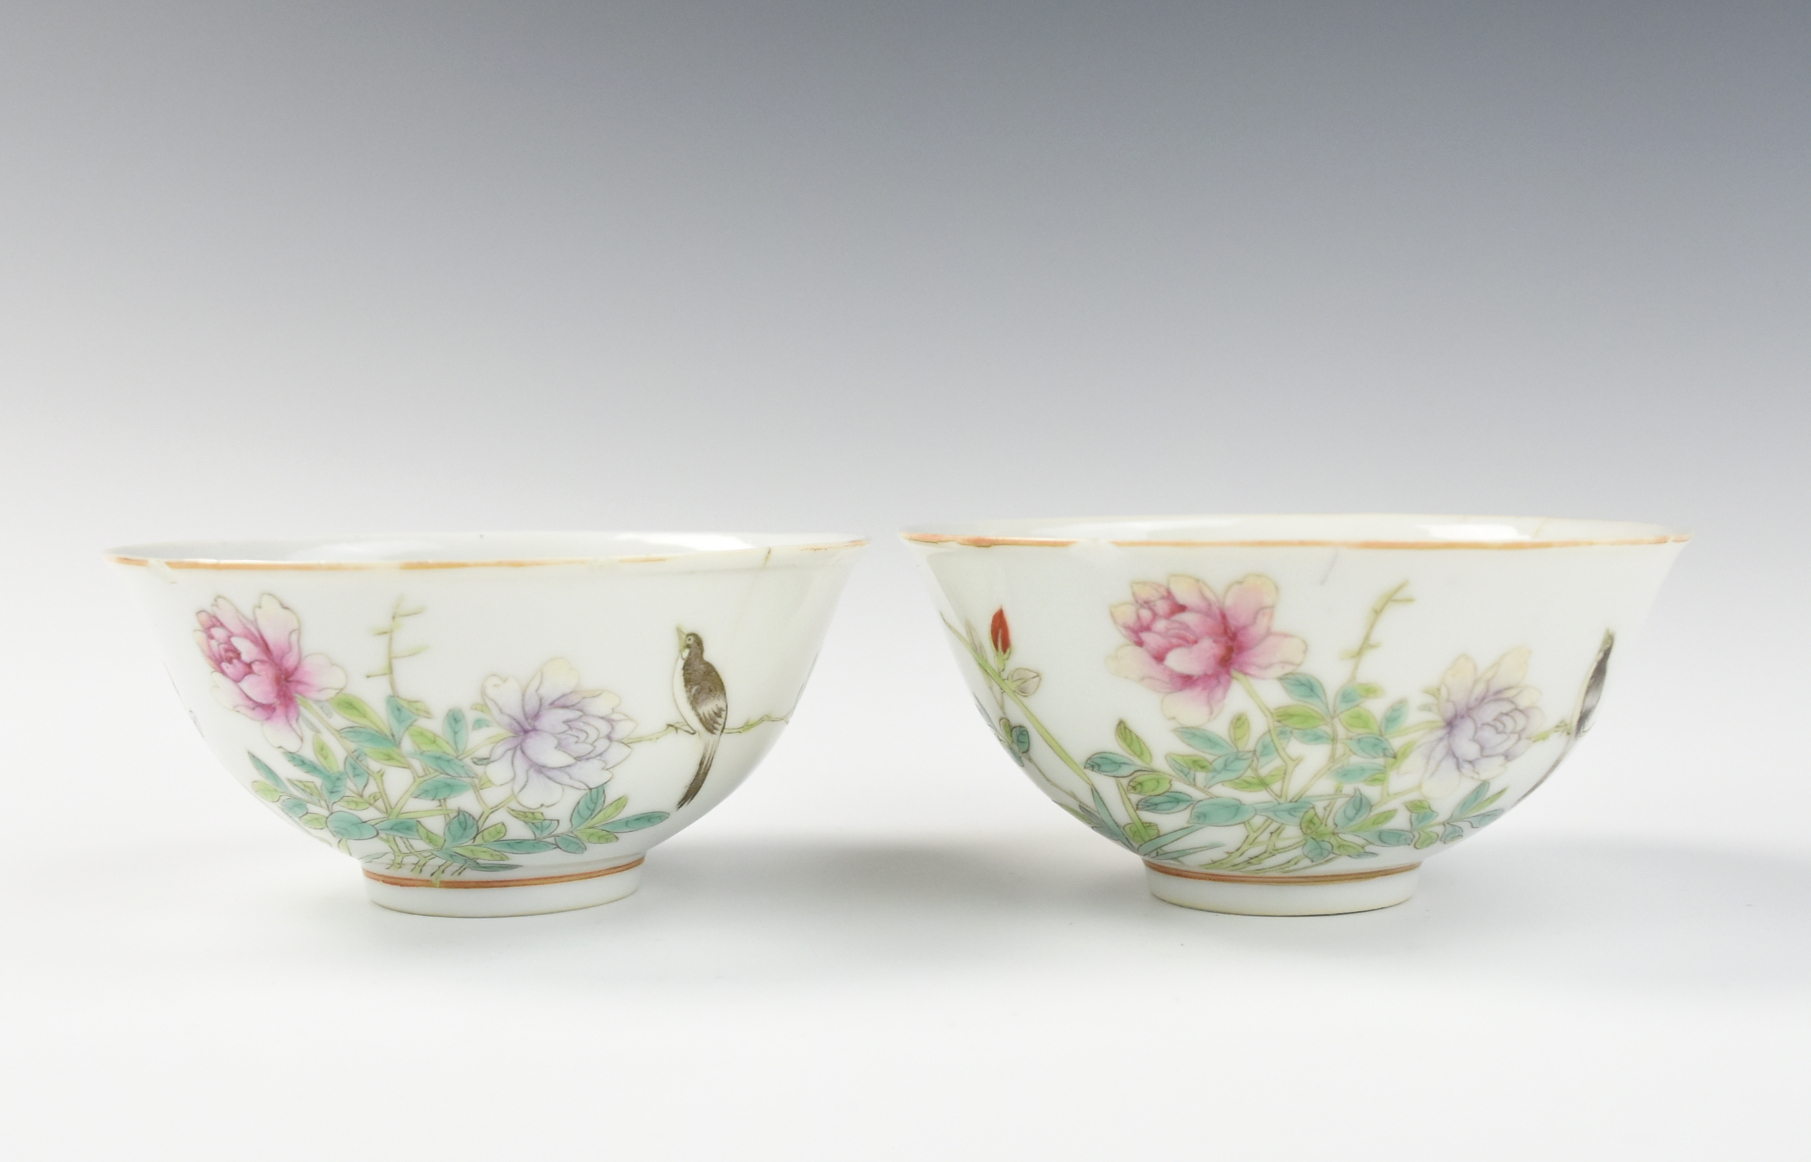 PAIR OF CHINESE FAMILLE ROSE BOWL  2ce88d